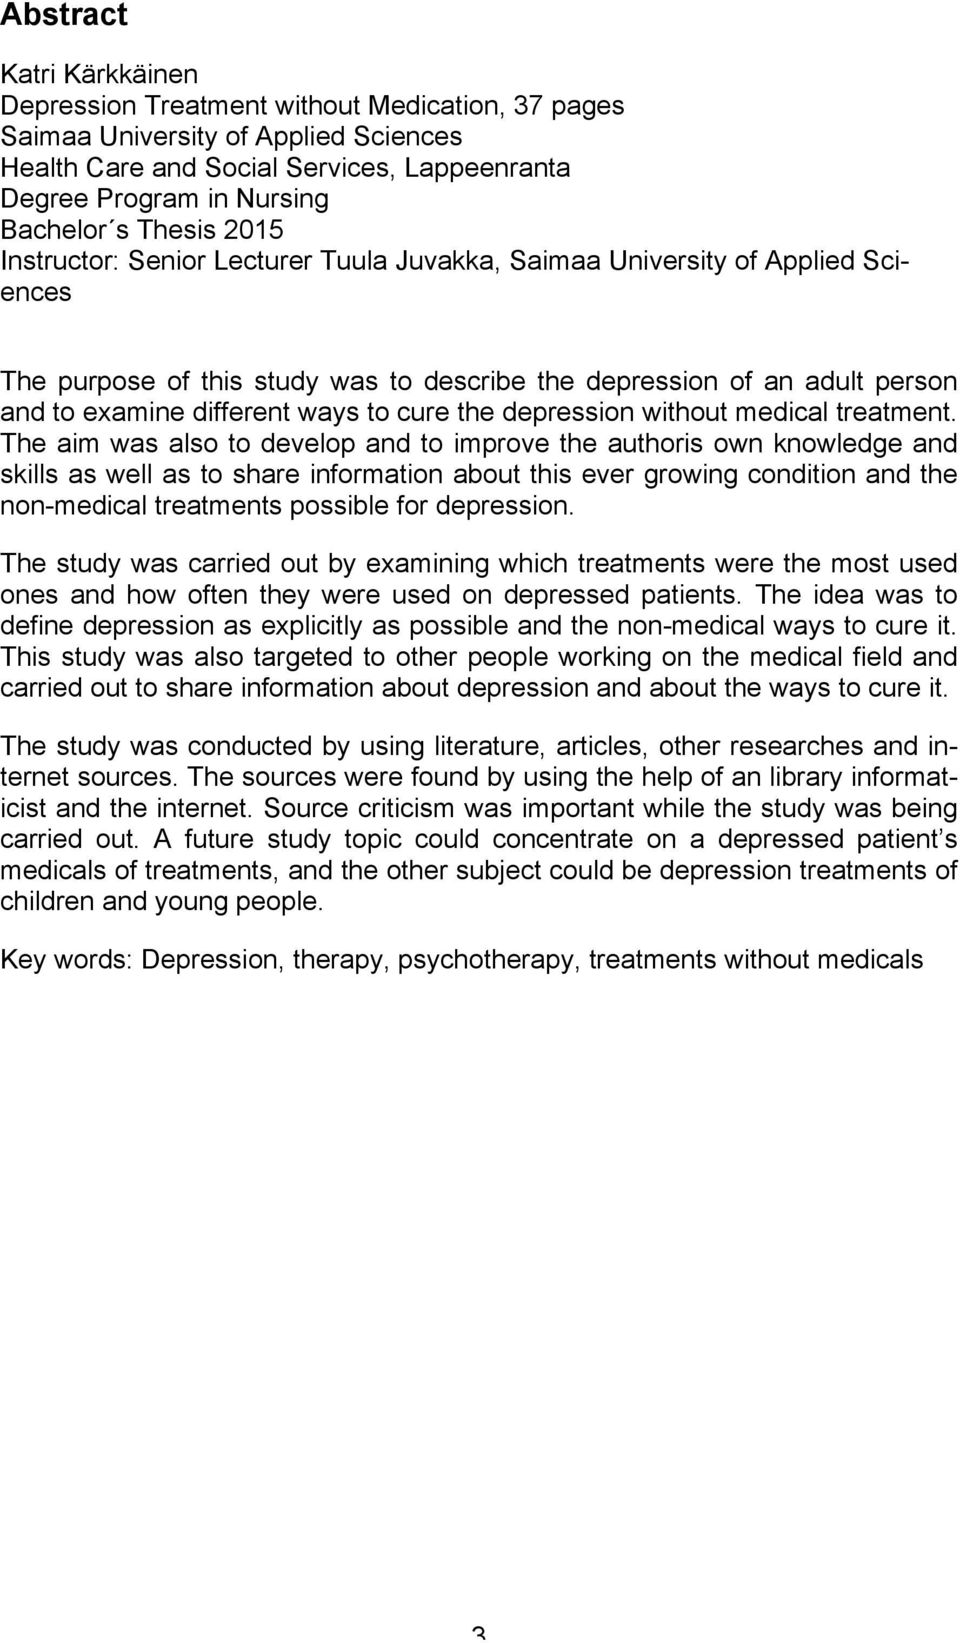 to cure the depression without medical treatment.